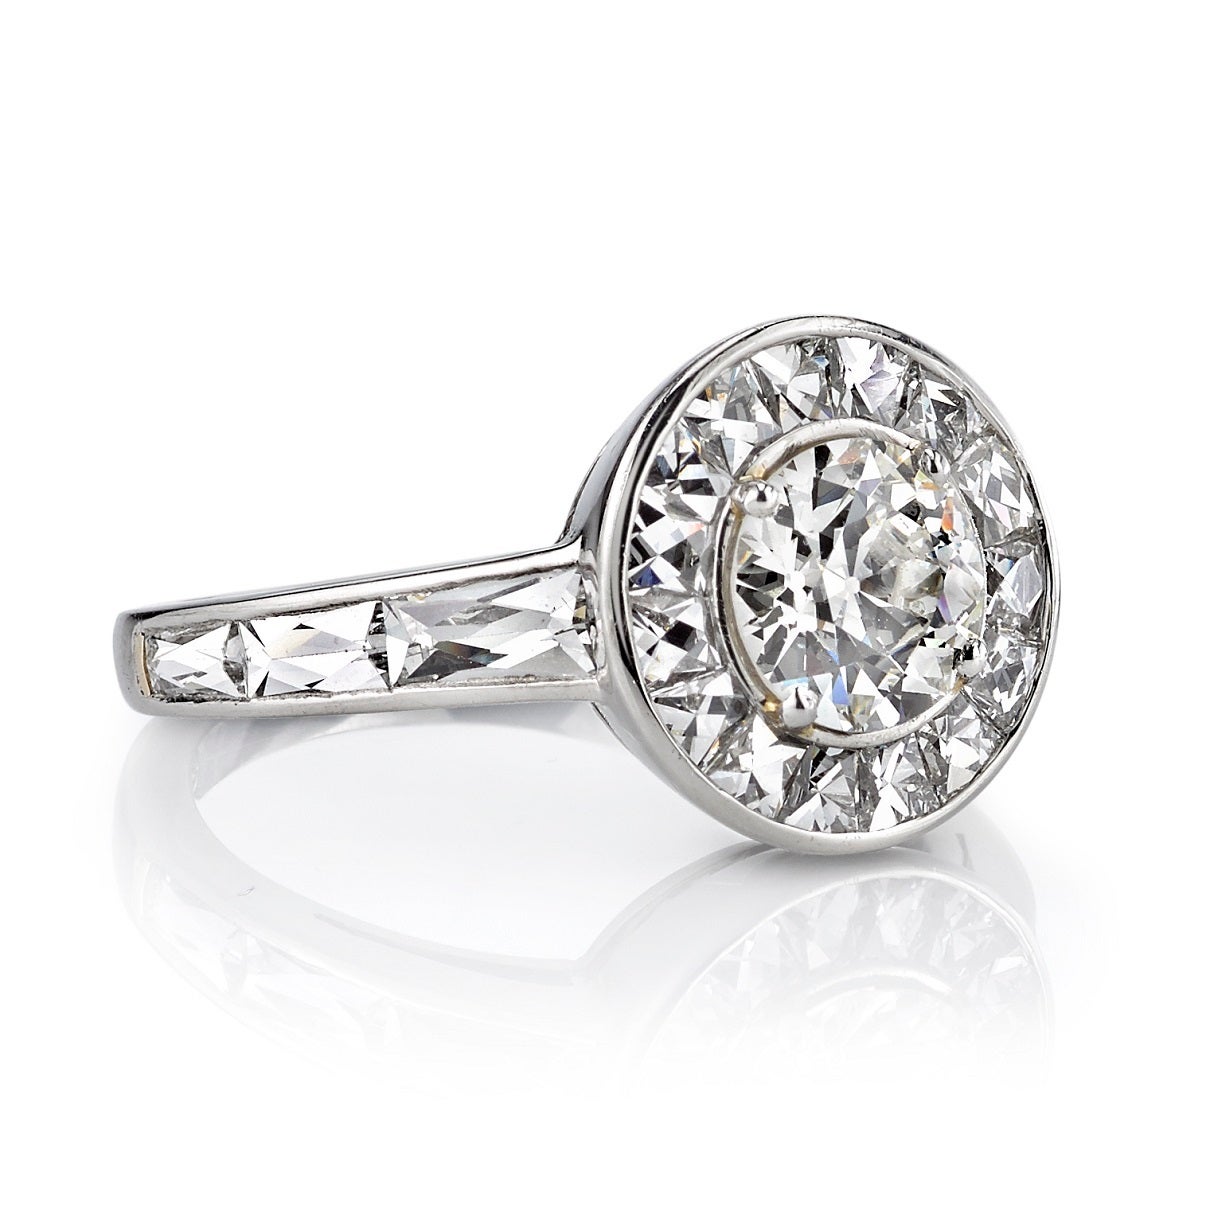 1.01ct K/SI1 GIA certified old European cut diamond set in a handcrafted platinum mounting.